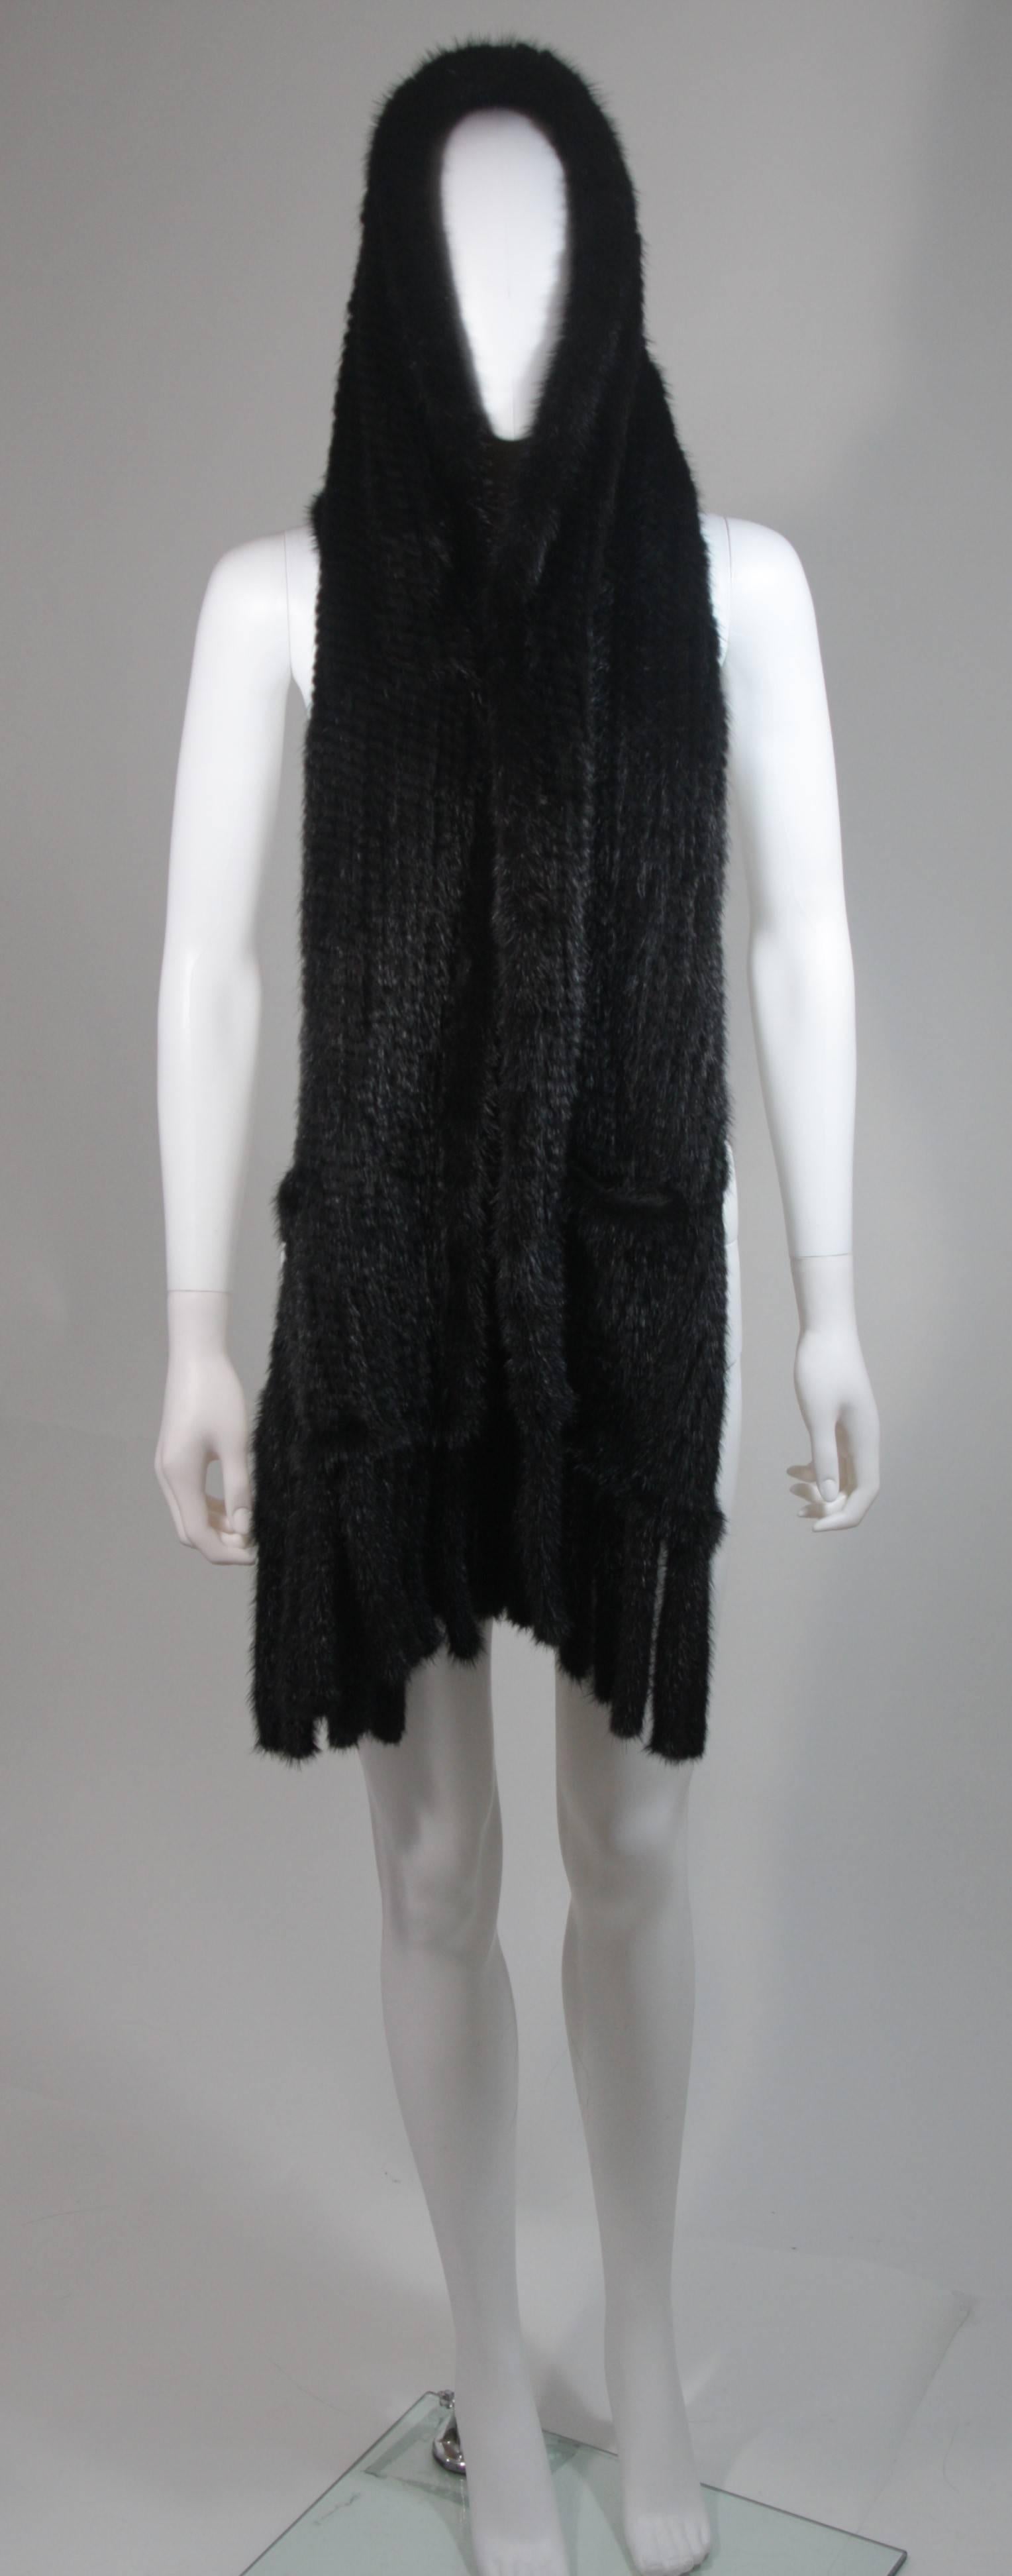 Women's Dark Brown Ranch Mink Stole with Fringe and Pockets For Sale